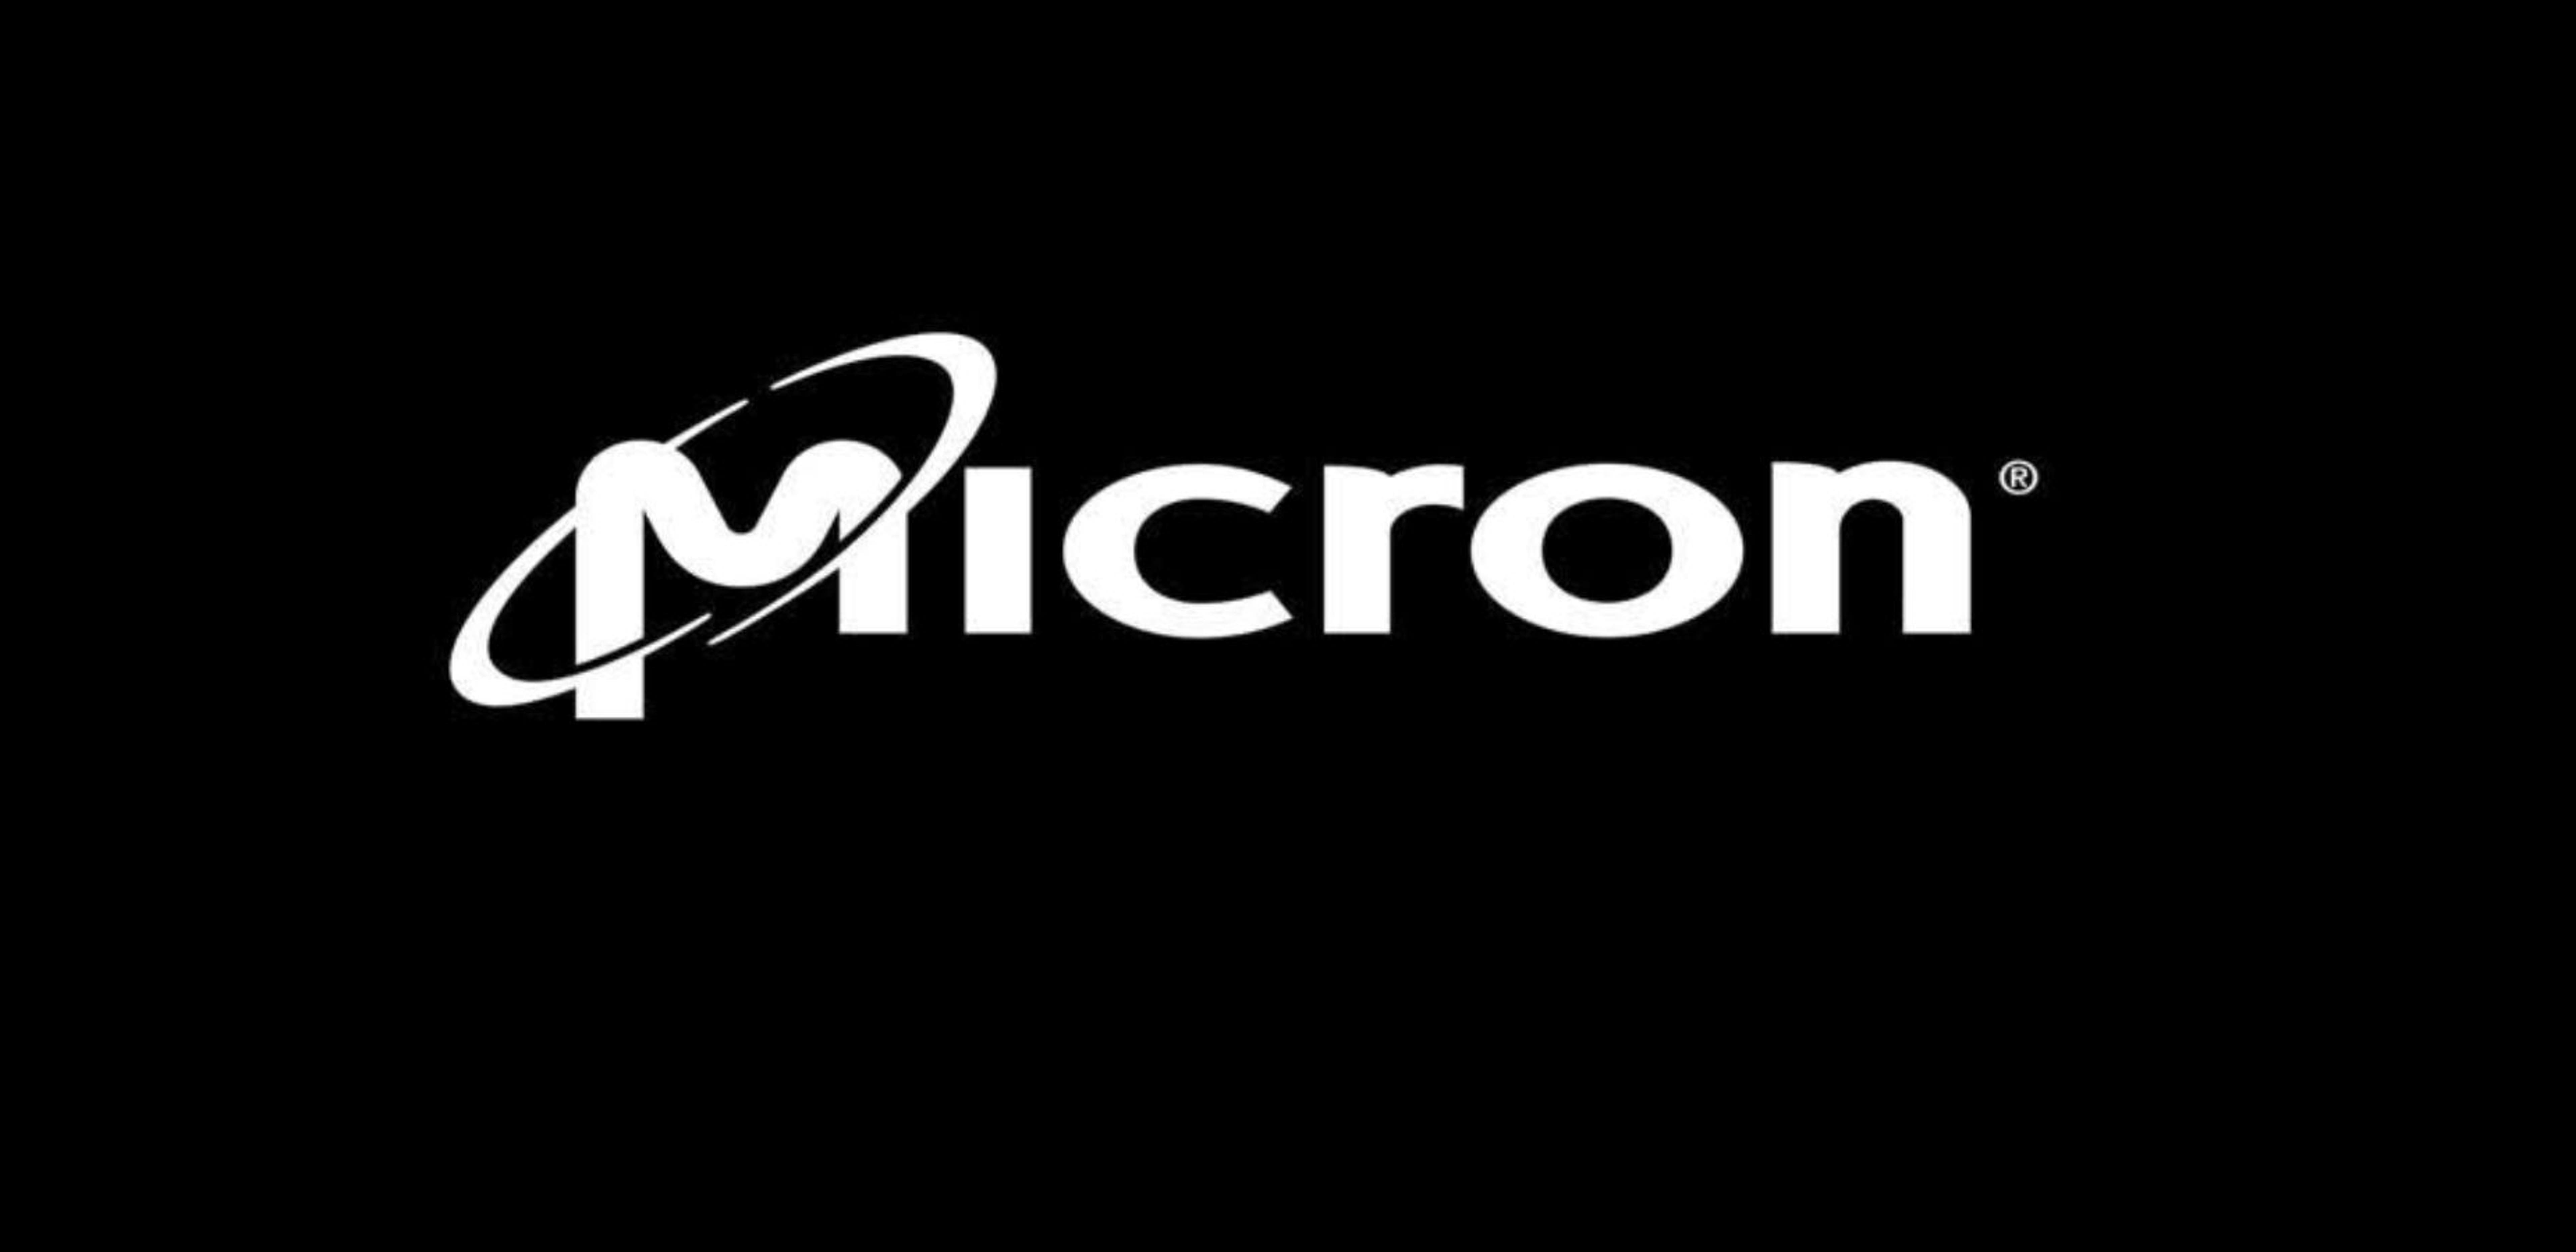 These Analysts Boost Price Targets On Micron Technology After Q2 Results